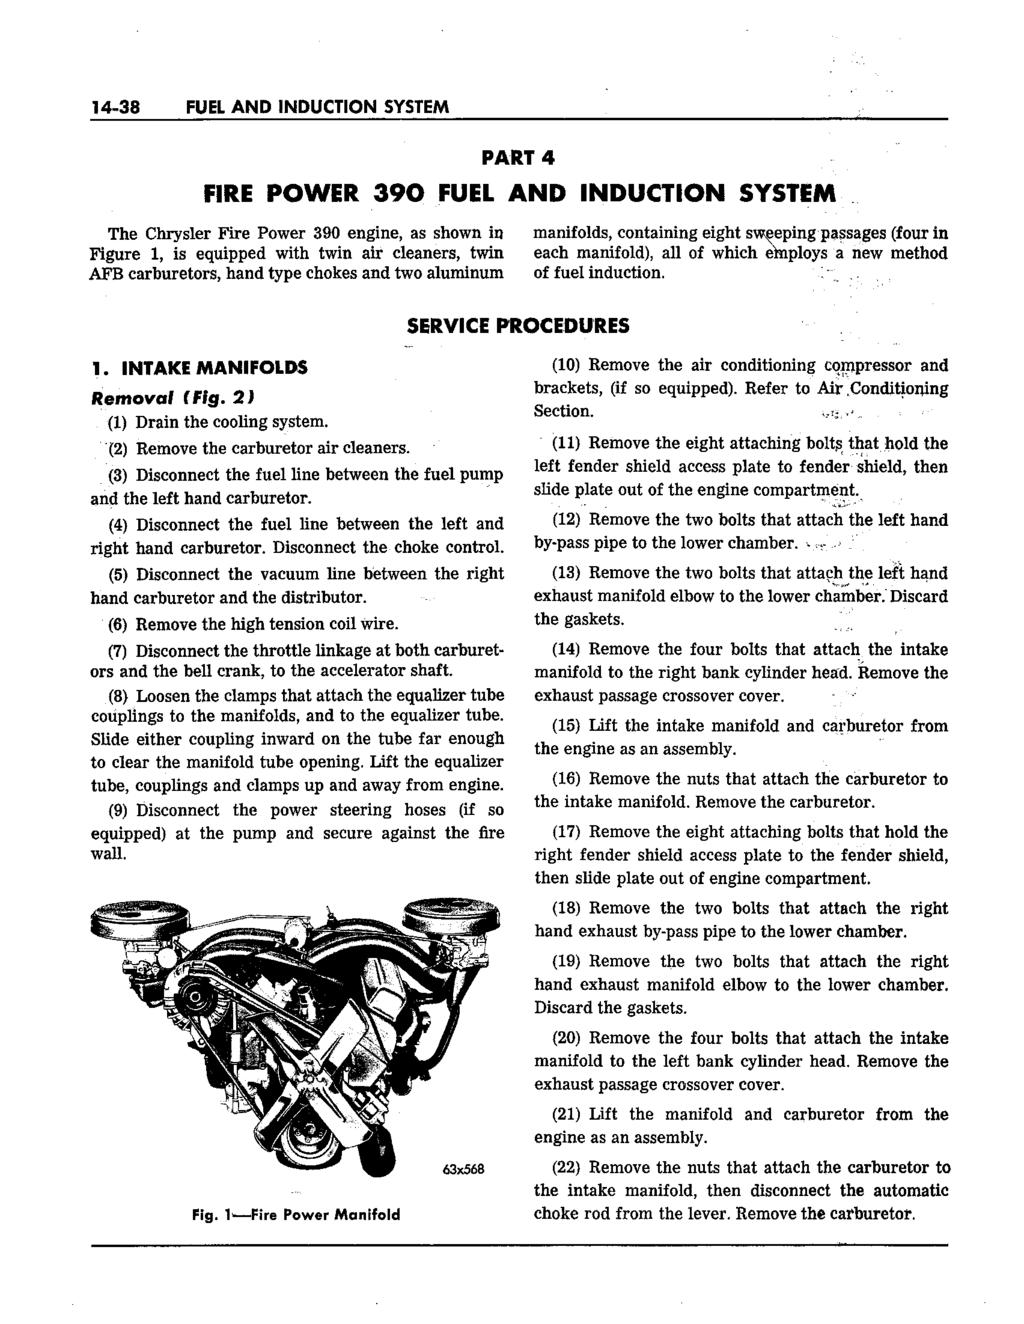 14-38 FUEL AND INDUCTION SYSTEM PART 4 FIRE POWER 390 FUEL AND INDUCTION SYSTEM The Chrysler Fire Power 390 engine, as shown in Figure 1, is equipped with twin air cleaners, twin AFB carburetors,